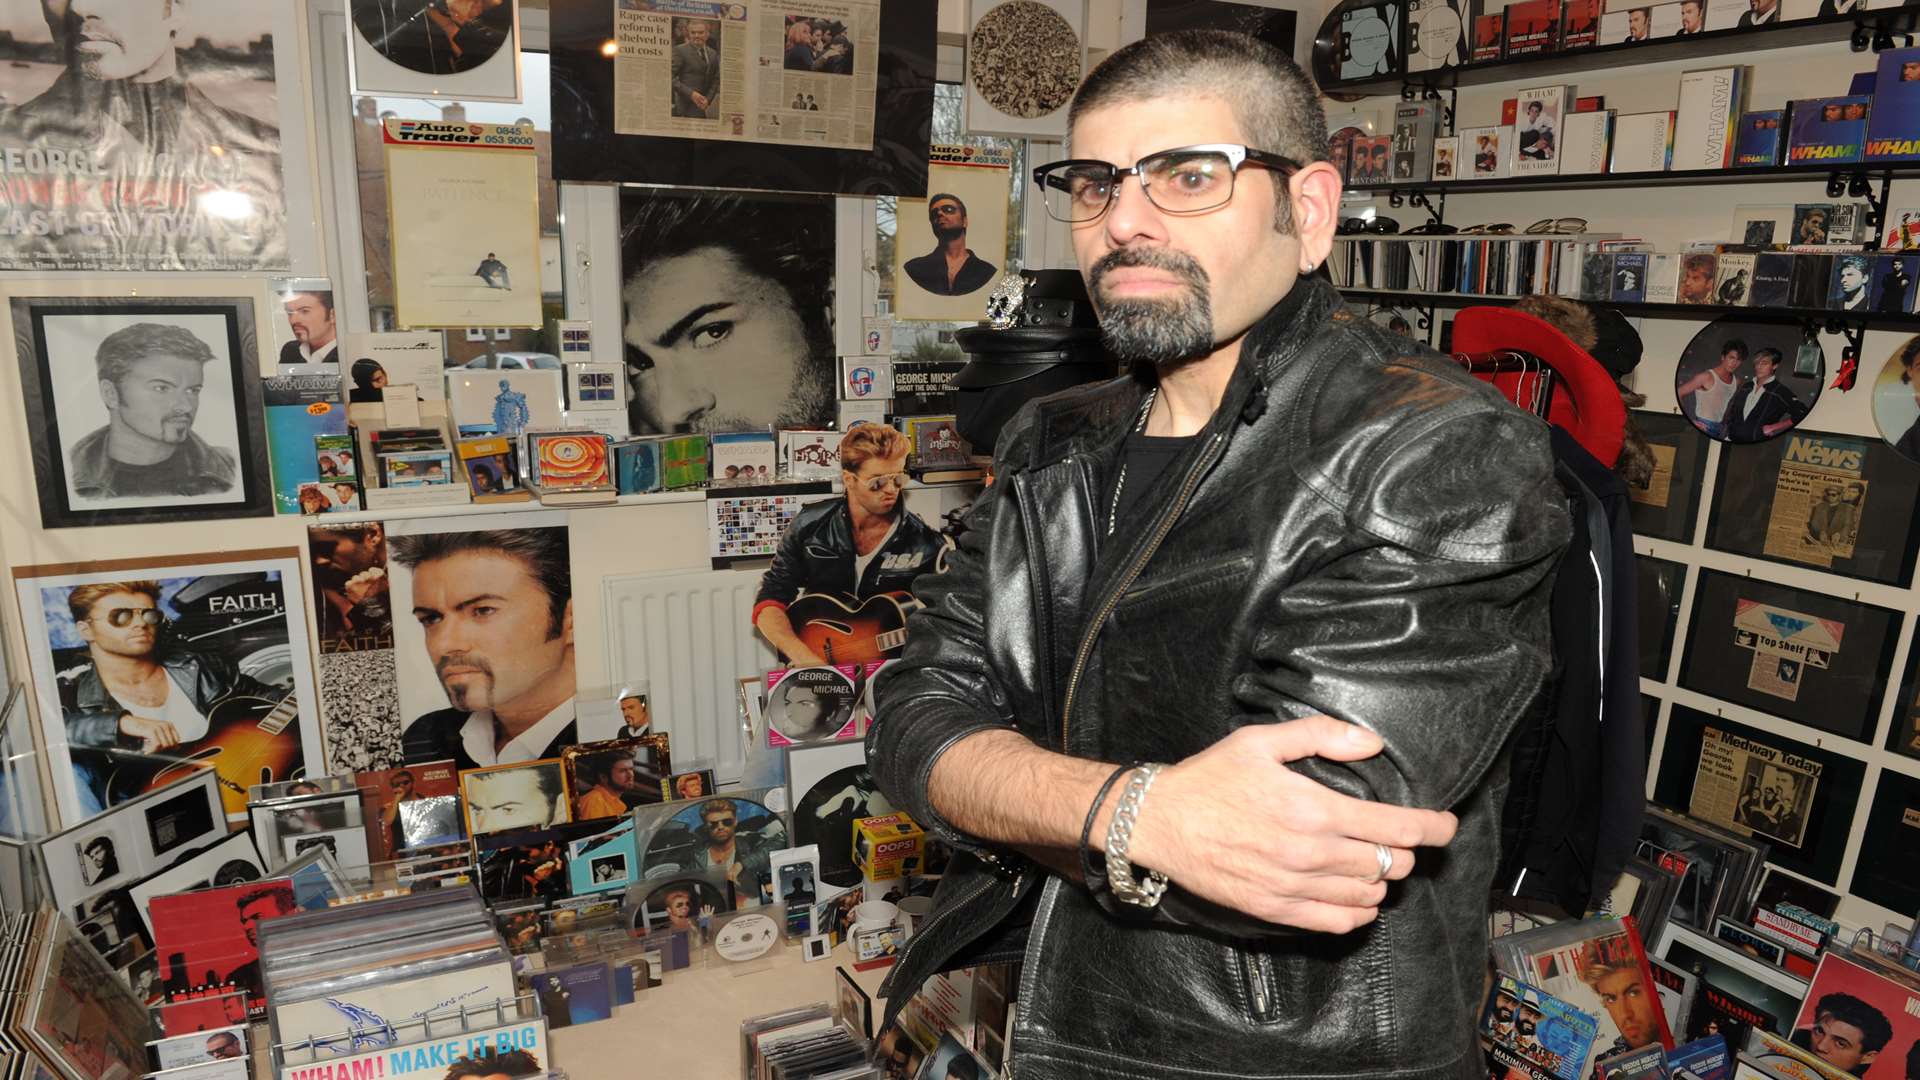 Saf has records, posters and signed memorabilia in a room dedicated to the singer